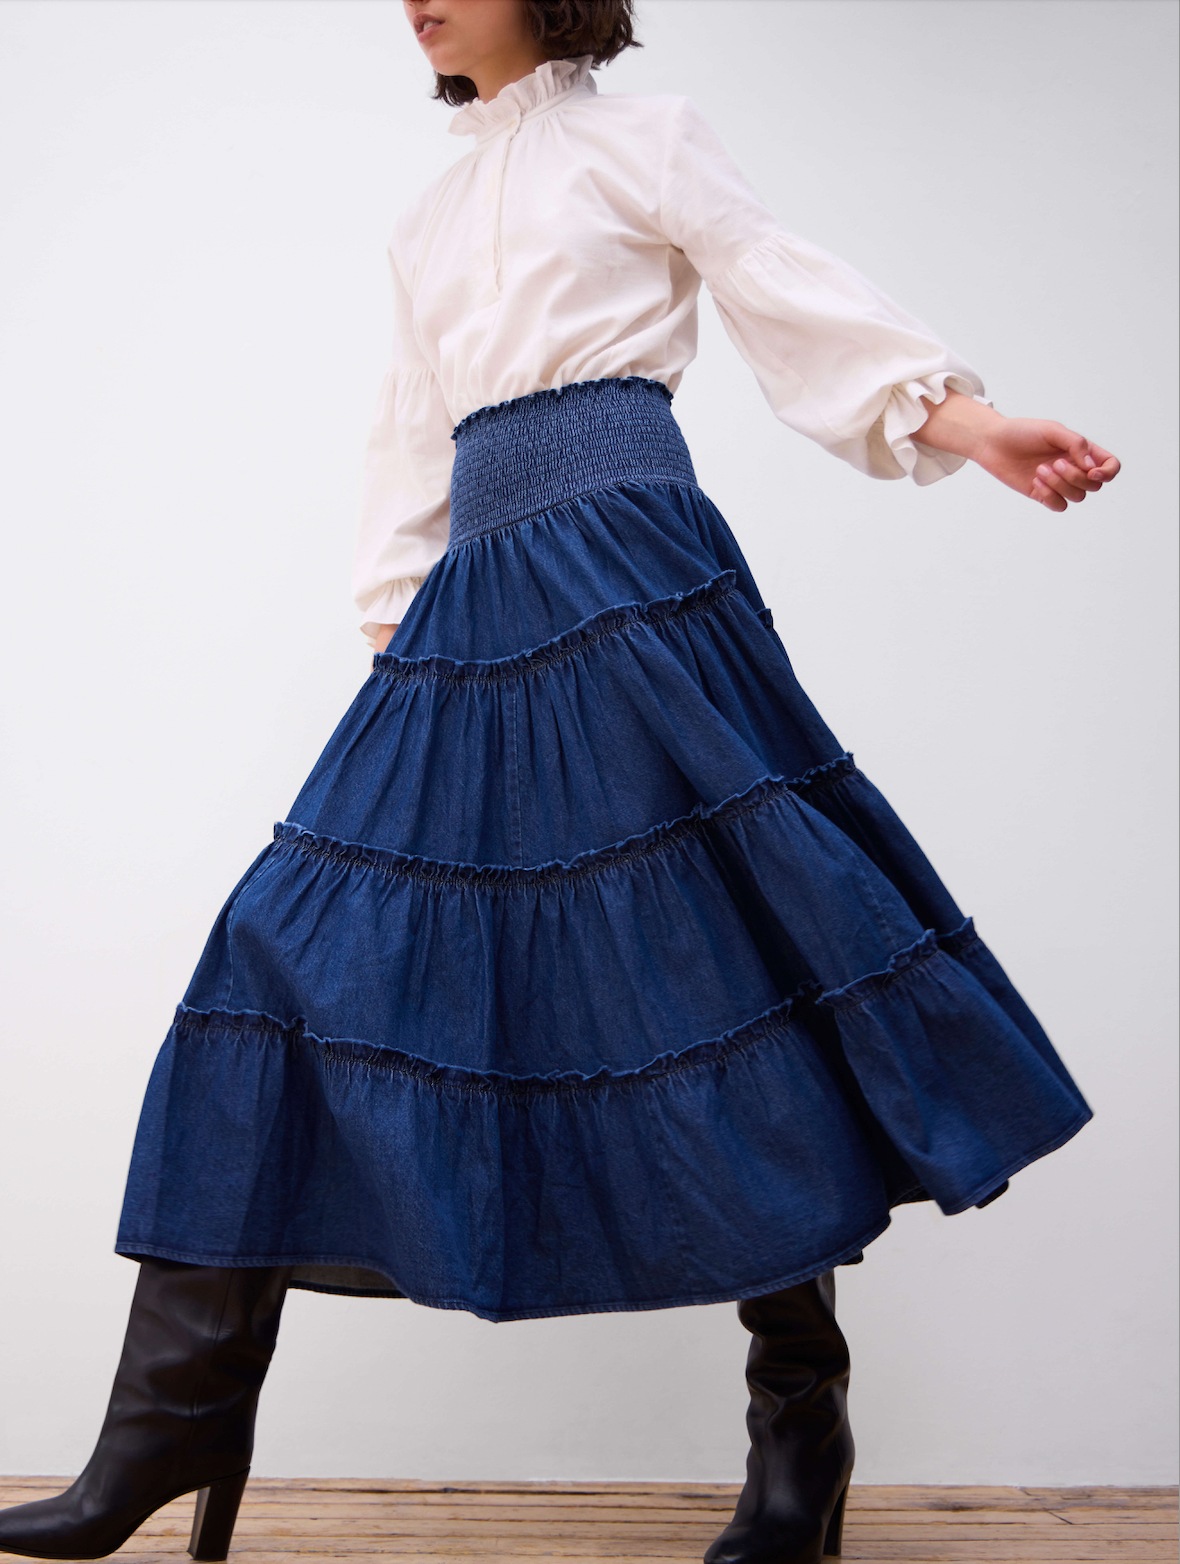 The Tiered Skirt